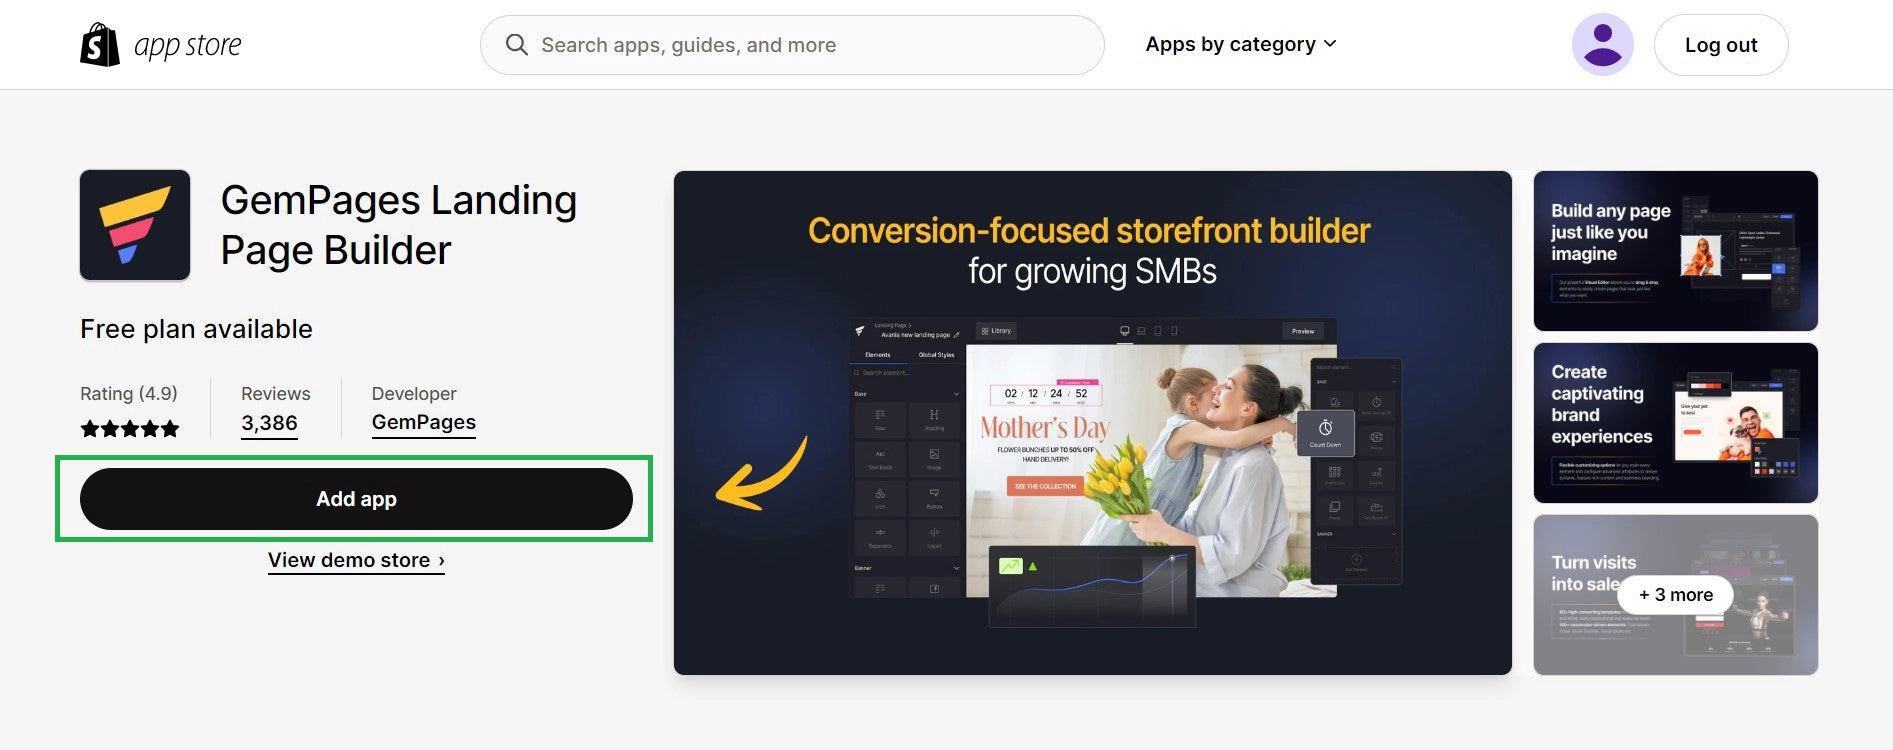 GemPages Landing Page Builder app in Shopify App Store